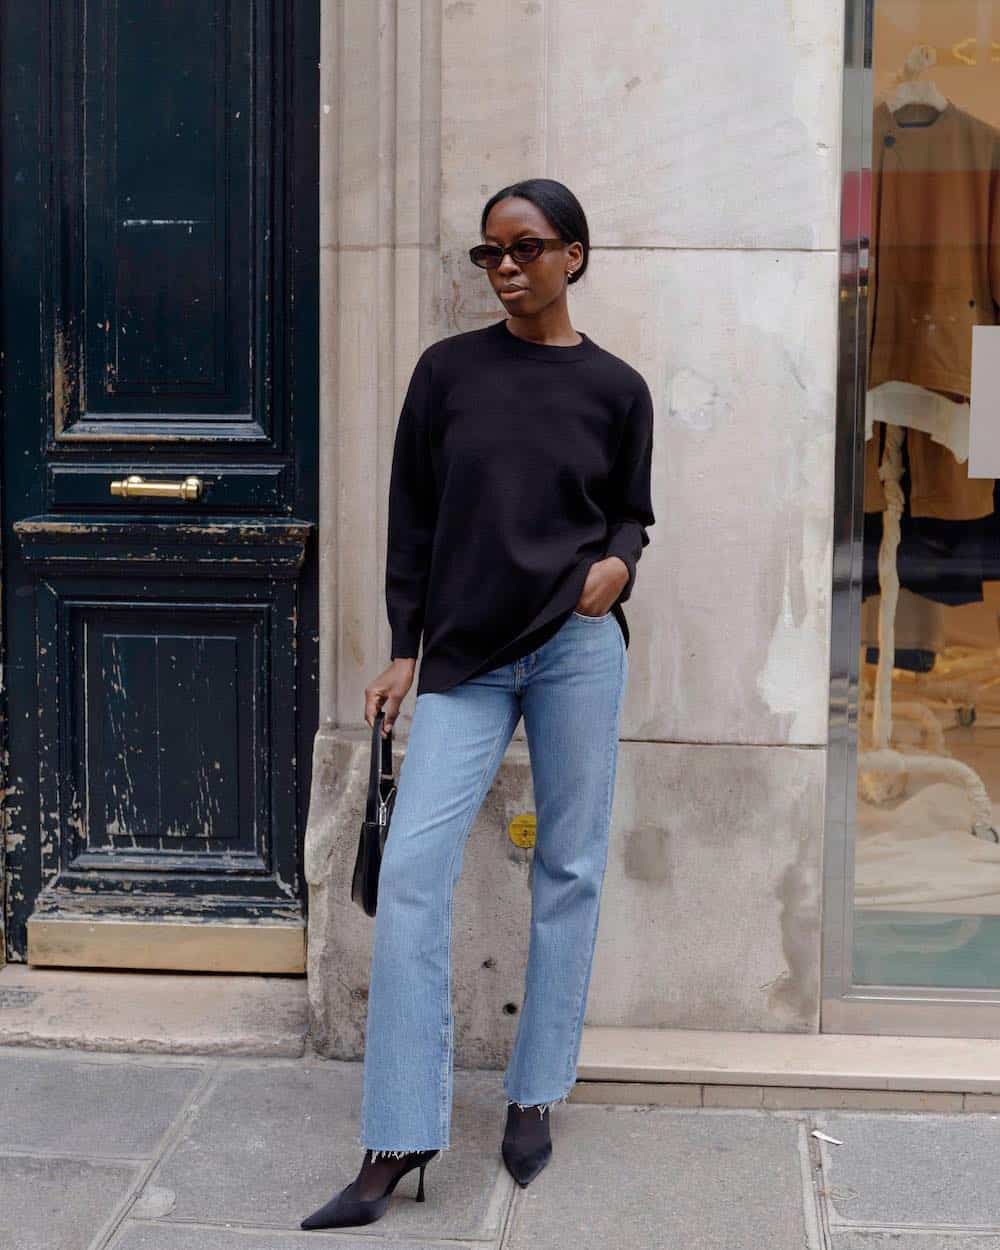 A woman wearing blue jeans with a black sweater, black heels, and a black handbag